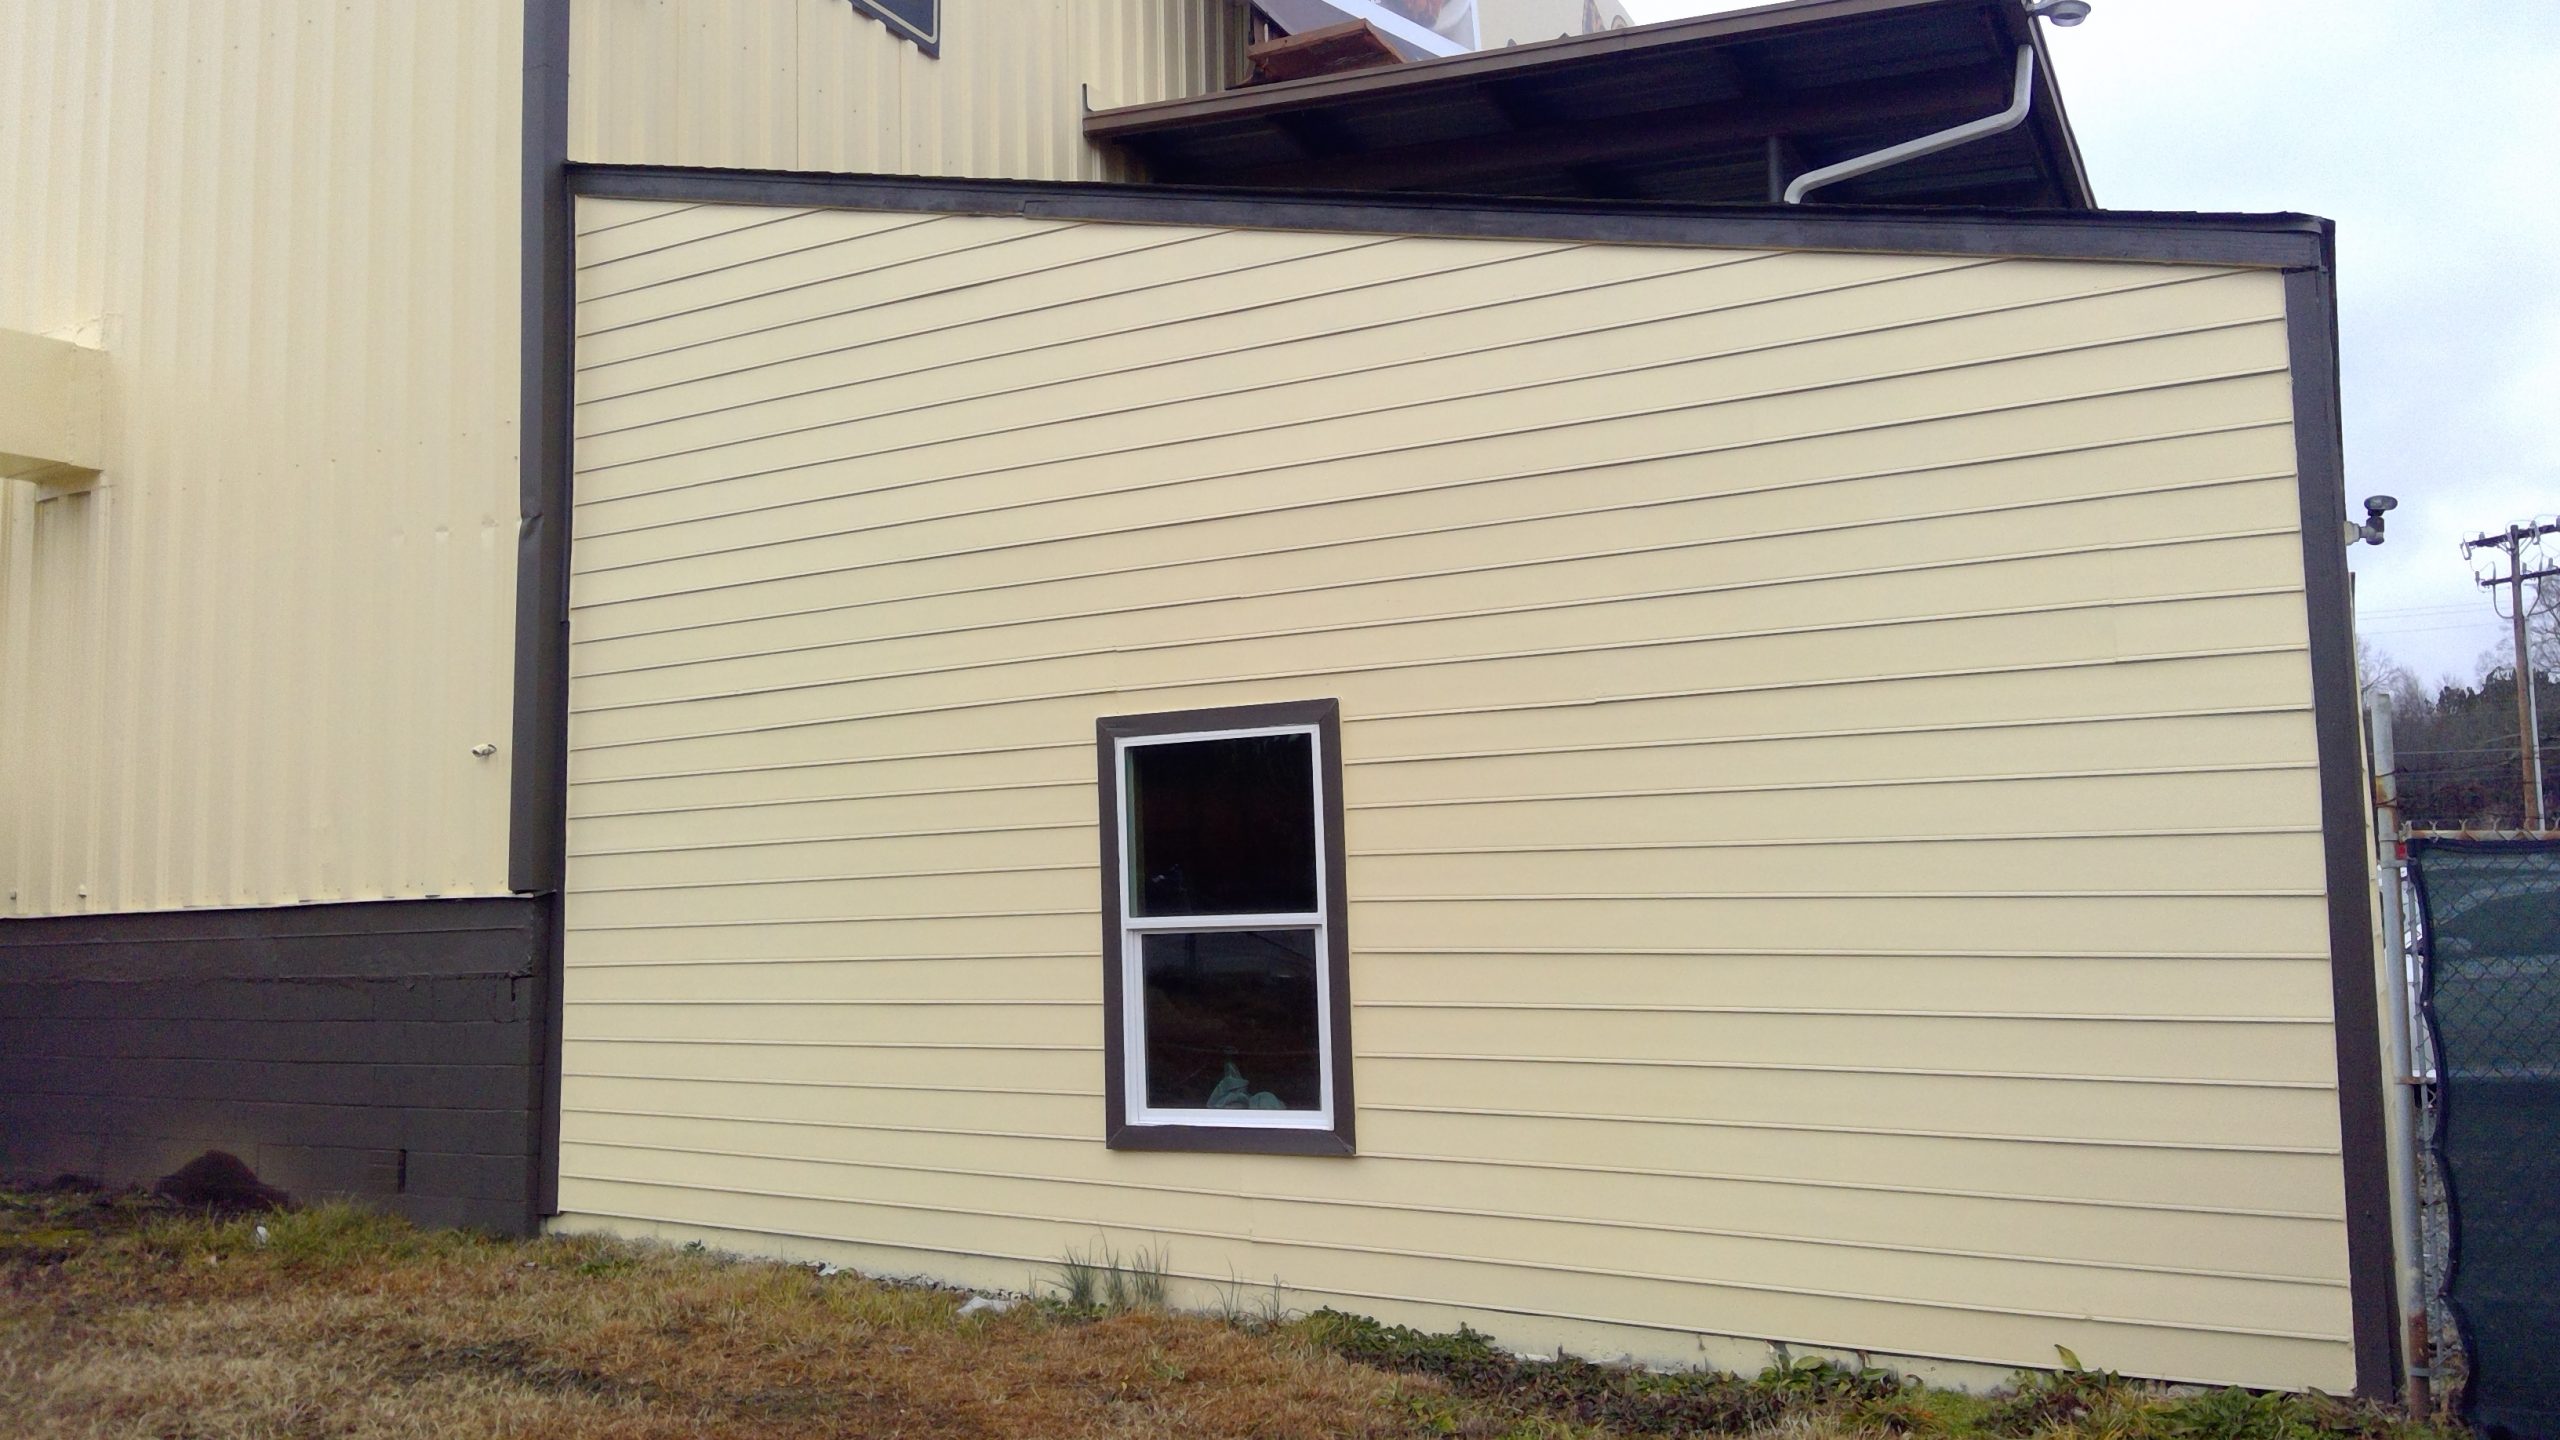 Commercial painting in Durham, NC - After